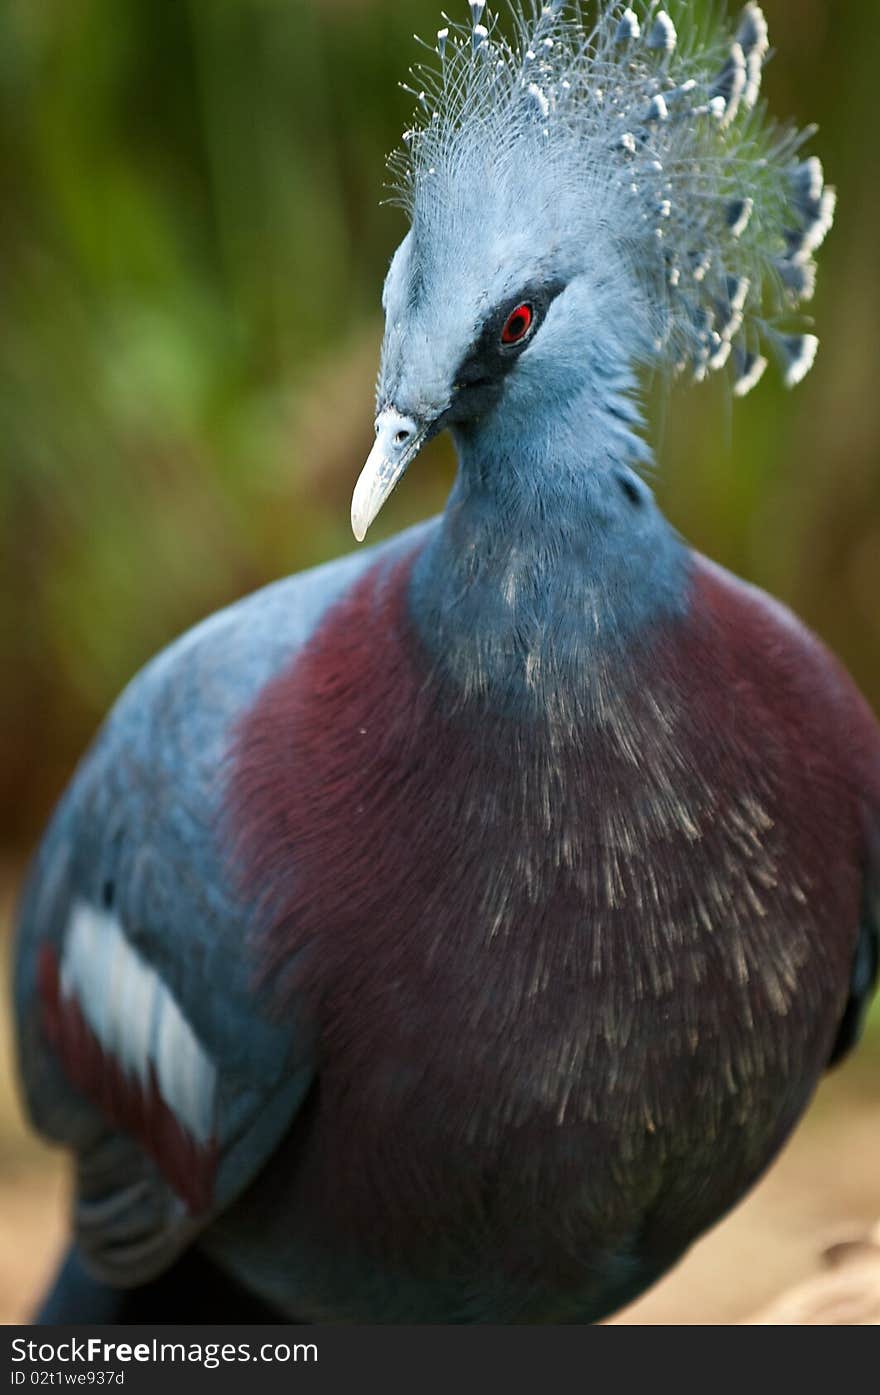 E Victoria Crowned Pigeon, Goura victoria, is a large, approximately 74cm (29 in) long and weighing up to 2.5 kg (5.5 lb), bluish-grey pigeon with elegant blue lace-like crests, maroon breast and red iris. E Victoria Crowned Pigeon, Goura victoria, is a large, approximately 74cm (29 in) long and weighing up to 2.5 kg (5.5 lb), bluish-grey pigeon with elegant blue lace-like crests, maroon breast and red iris.